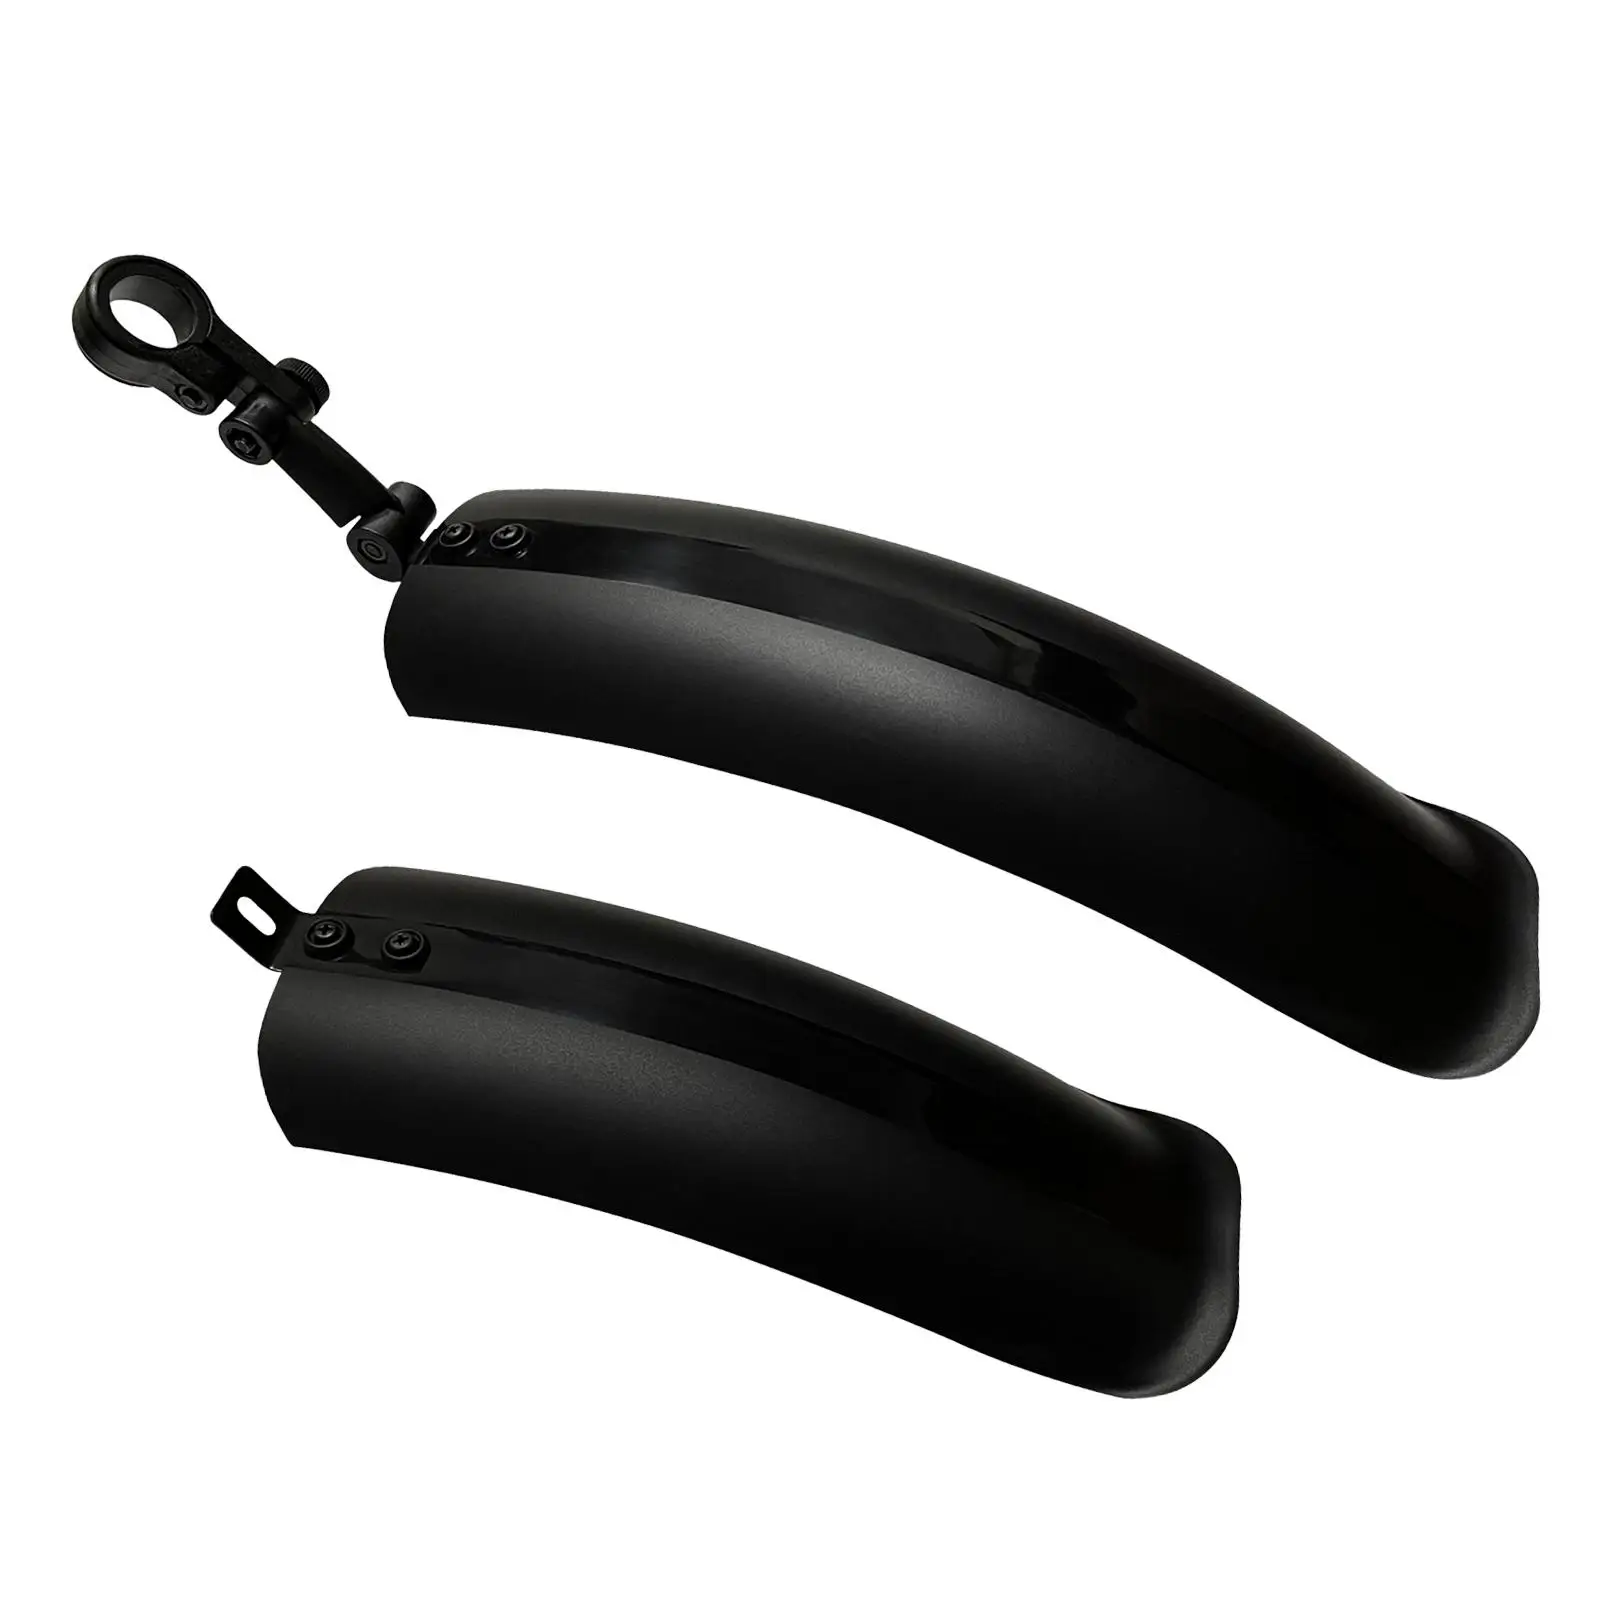 Bike Mudguard Front Rear Set Mud Guard Portable Components Accessories Front & Rear Fenders Bike Fenders for Riding Traveling